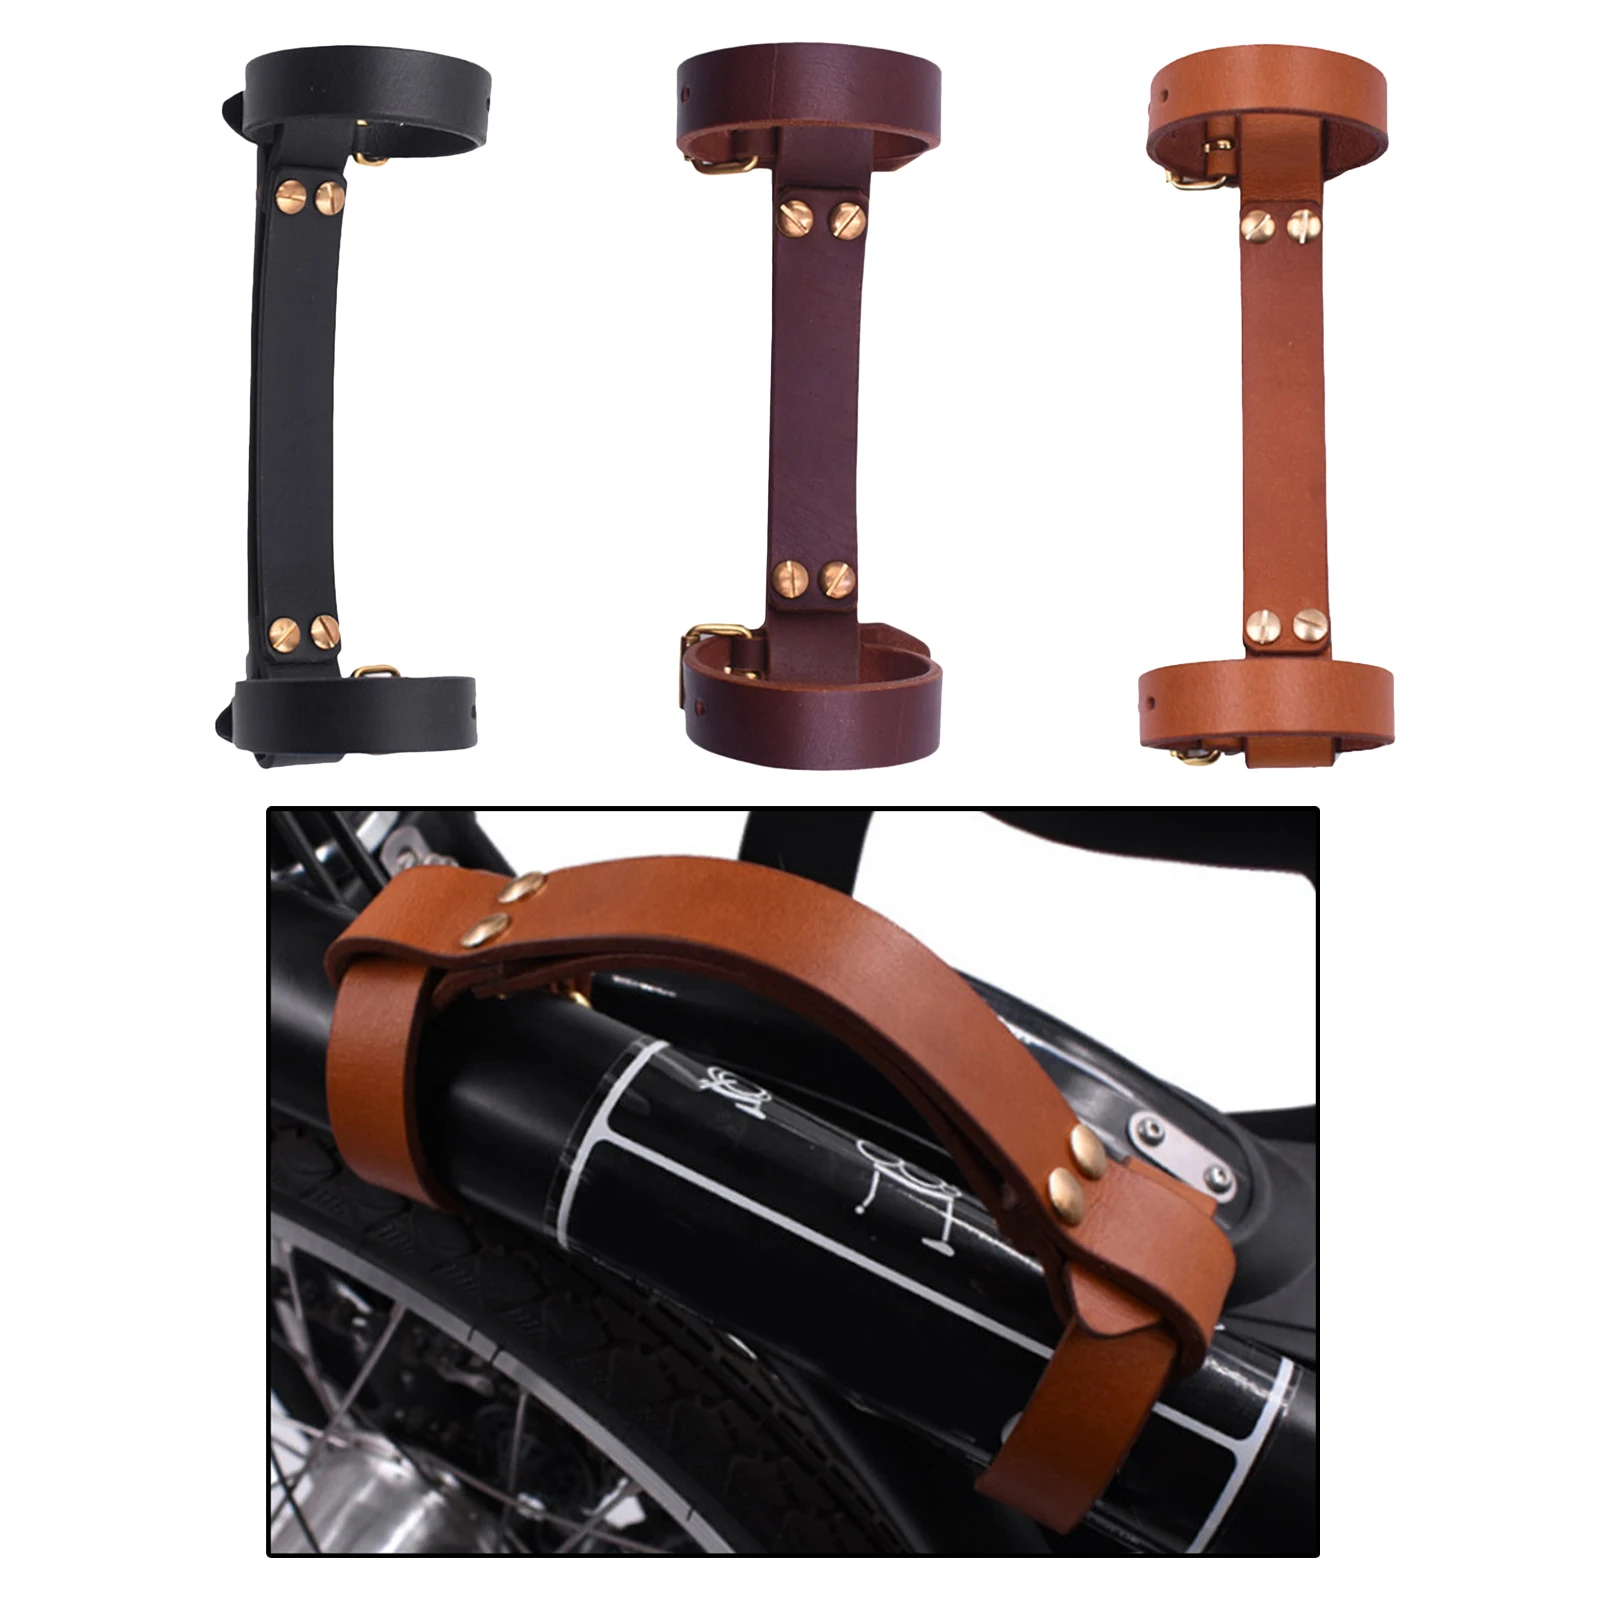 Foldable Bicycle Reliable Craftwork Carrying Bike Handlebar Handle Straps for Travel